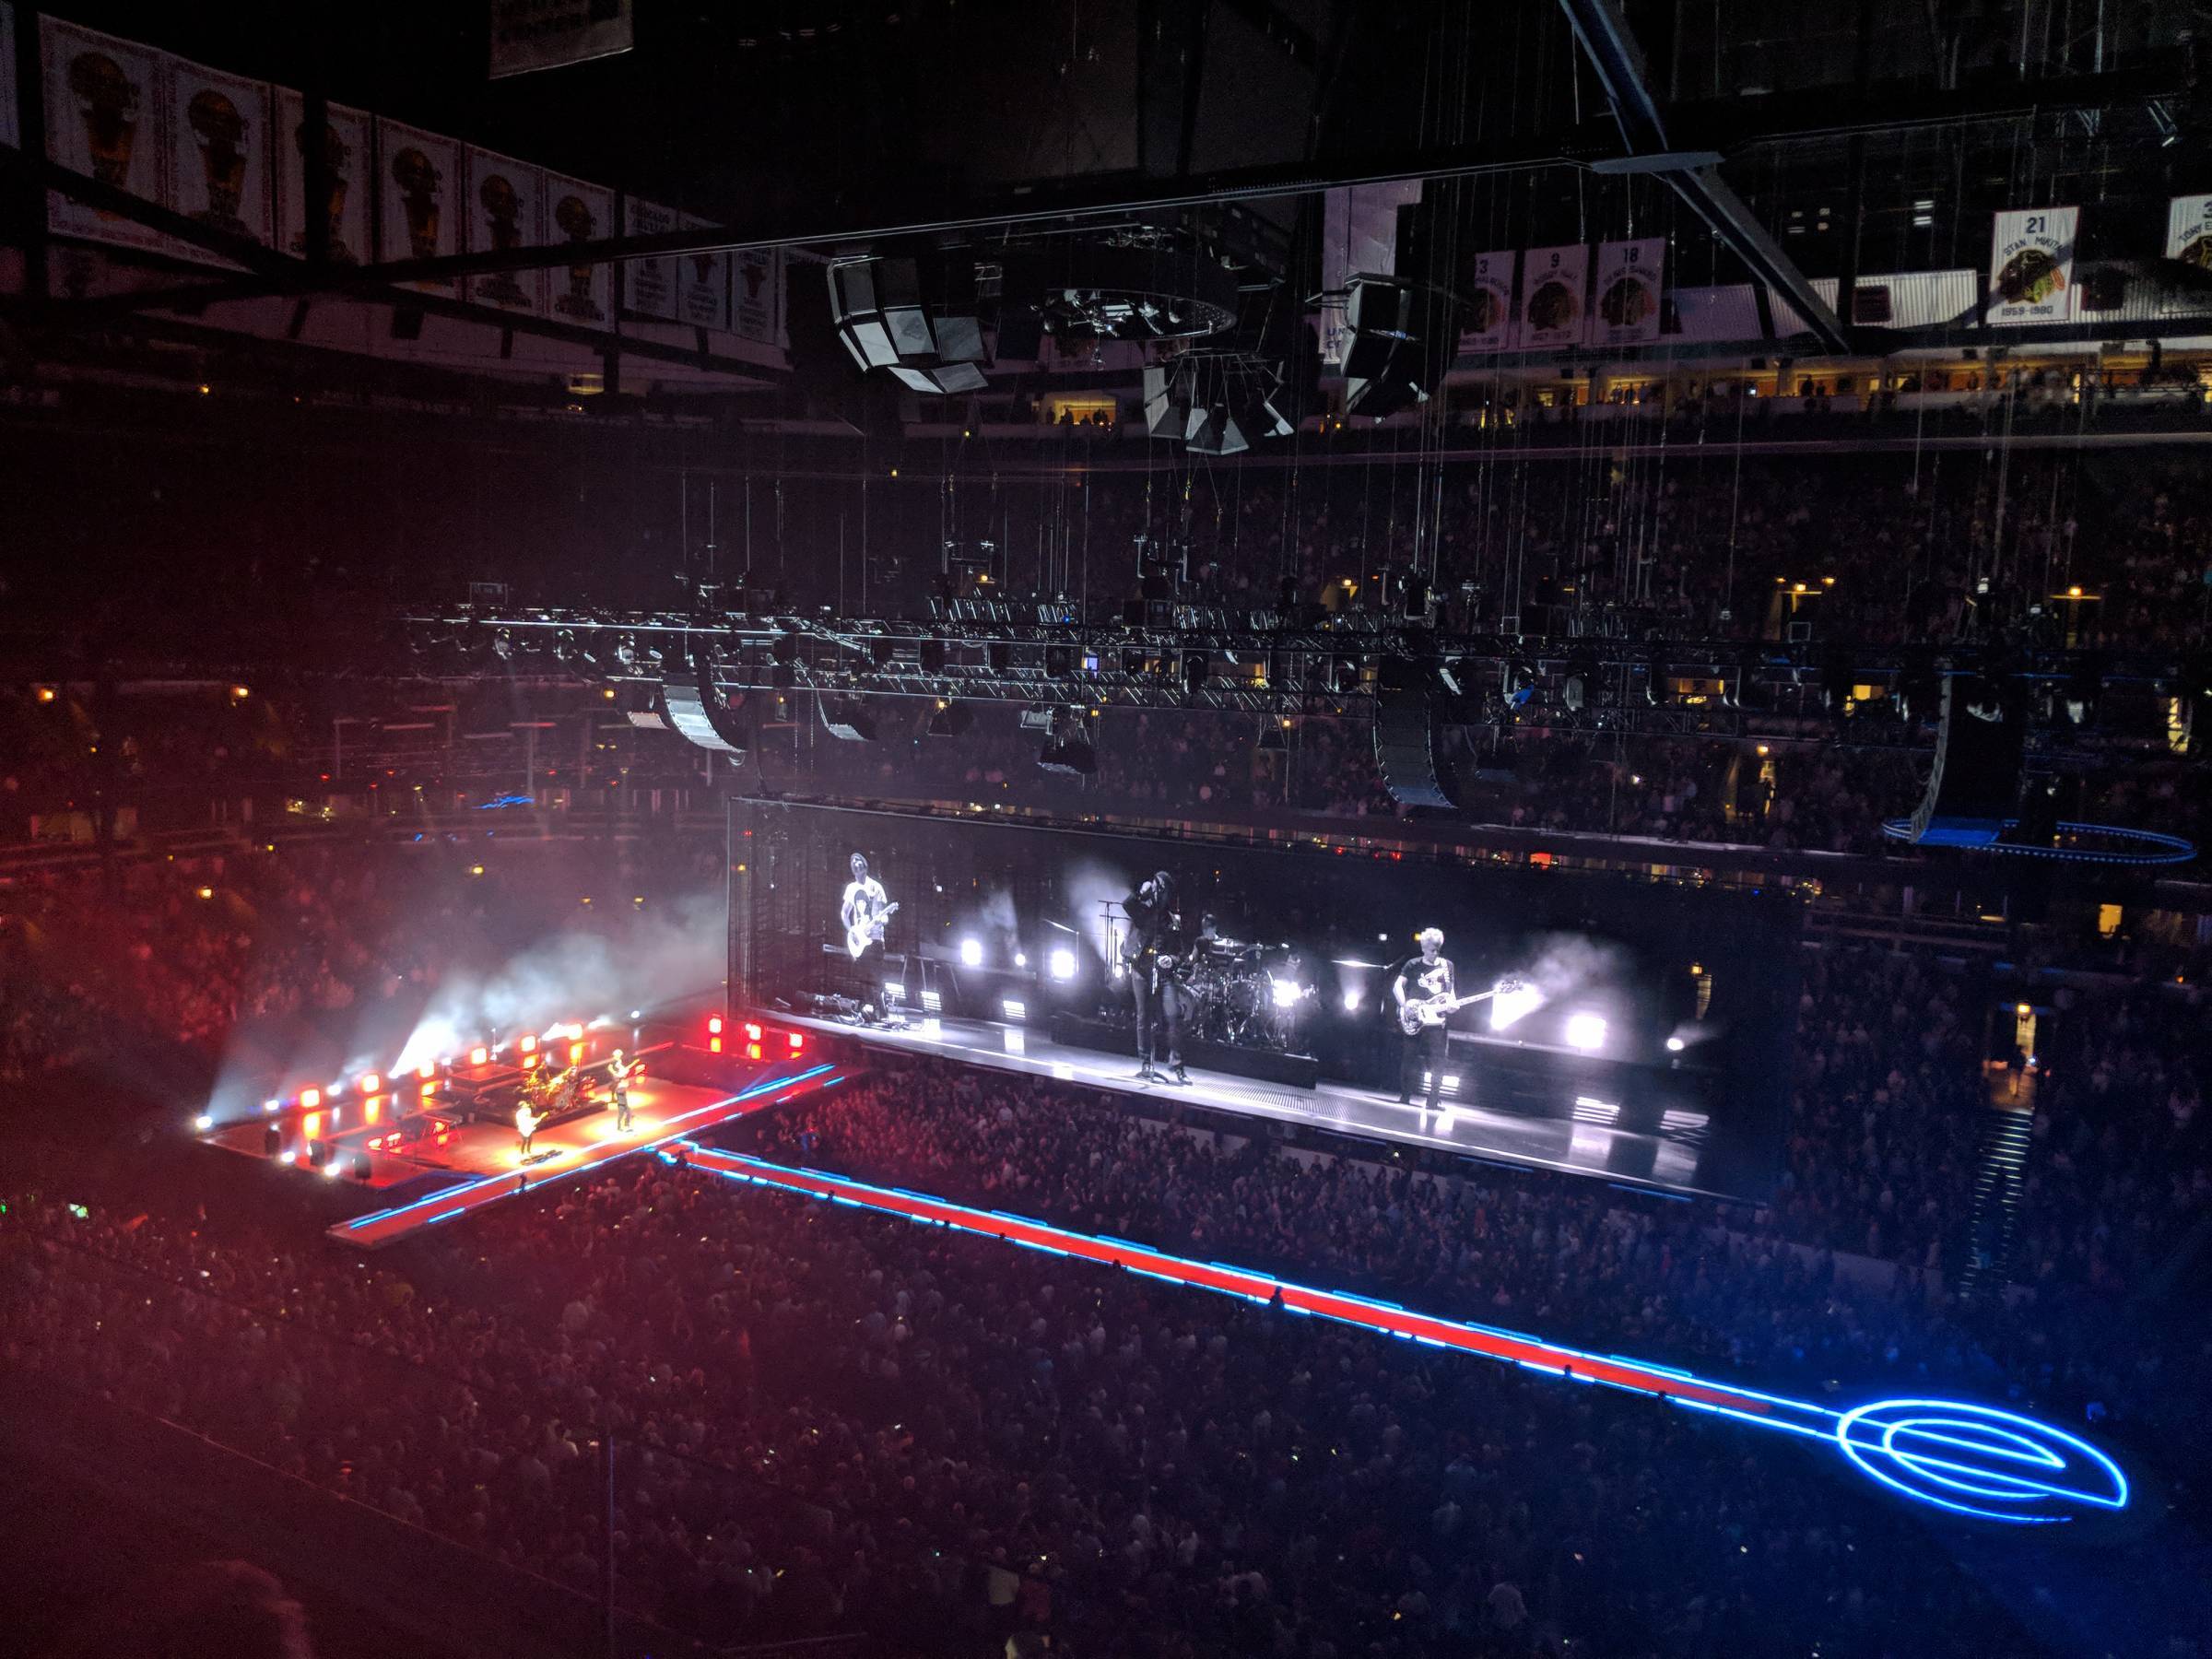 U2 concert at the united center in chicago